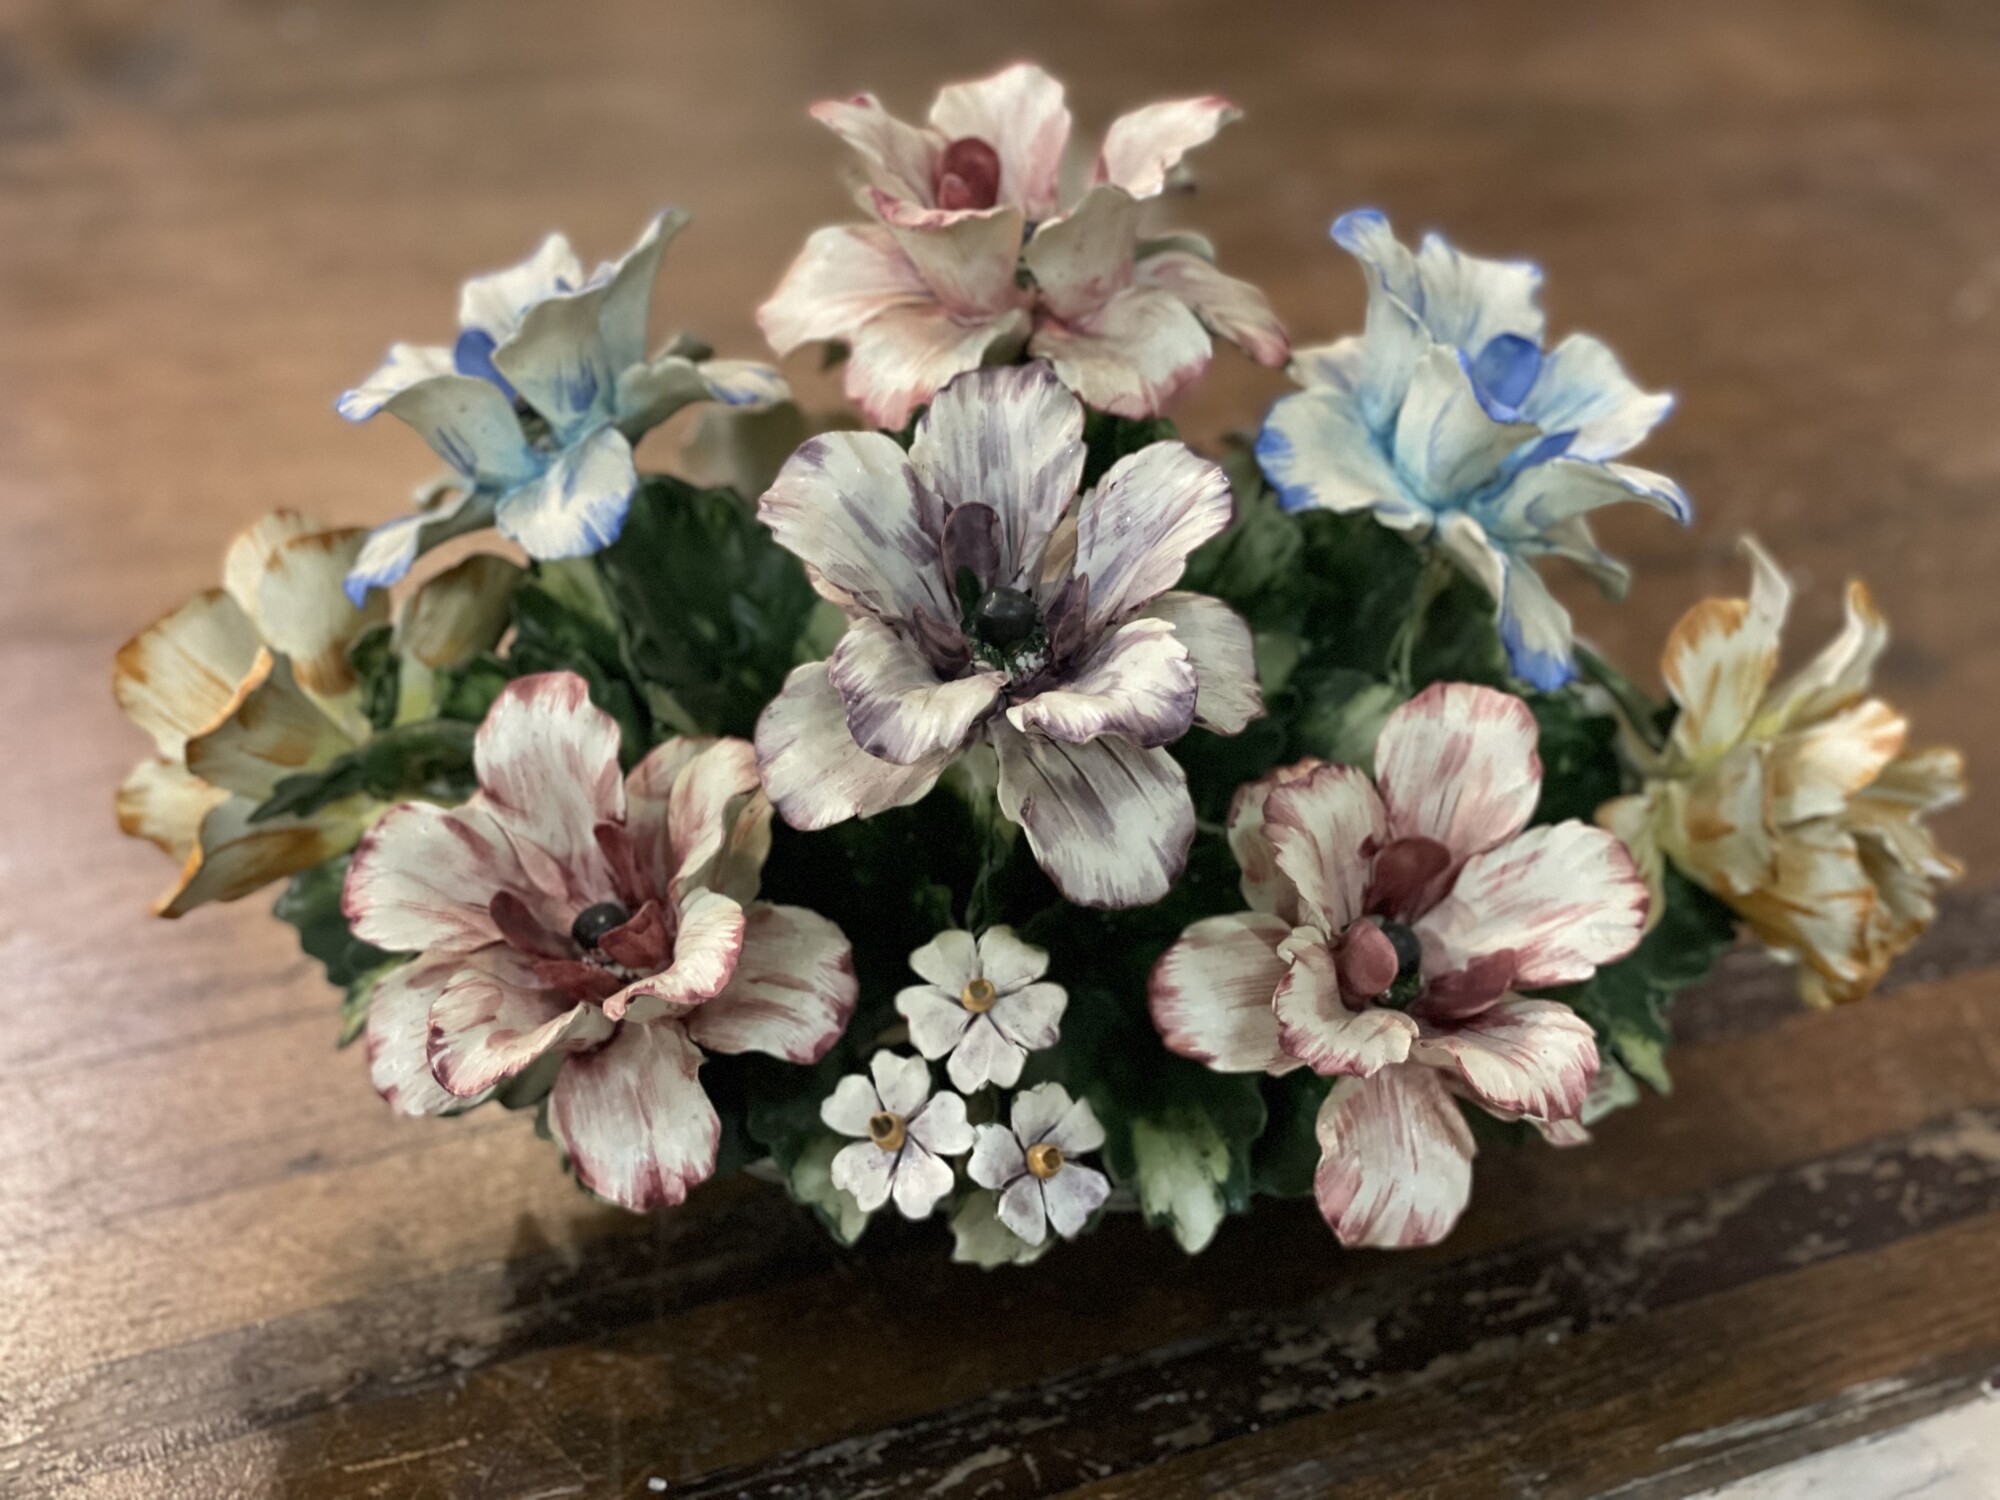 Capidomonte Flowers
Porcelain Italian pottery flowers. VERY delicate
Mint condition, no chips or breaks!
White, blue, pink, purple, green, yellow
Size: 19 long x 12 high